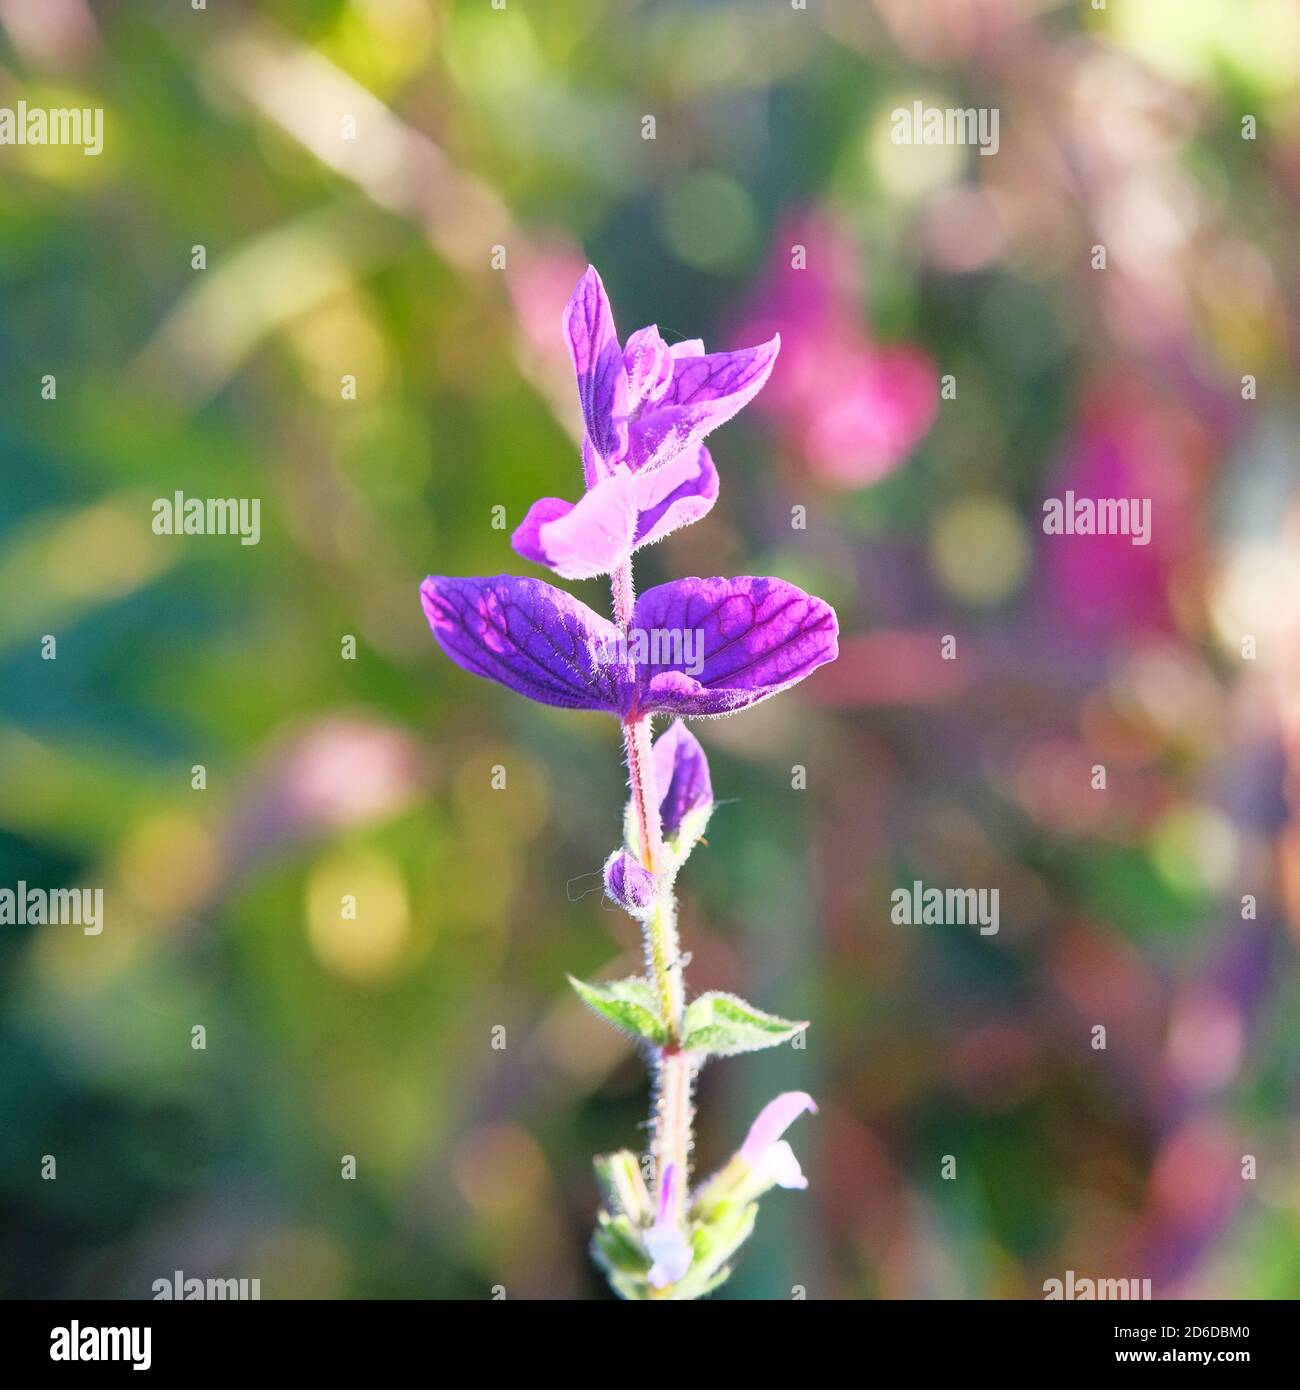 Purple flower in bloom on blurred bright background. Bright sunlight on the petals of violet flower in spring. Close up. Stock Photo